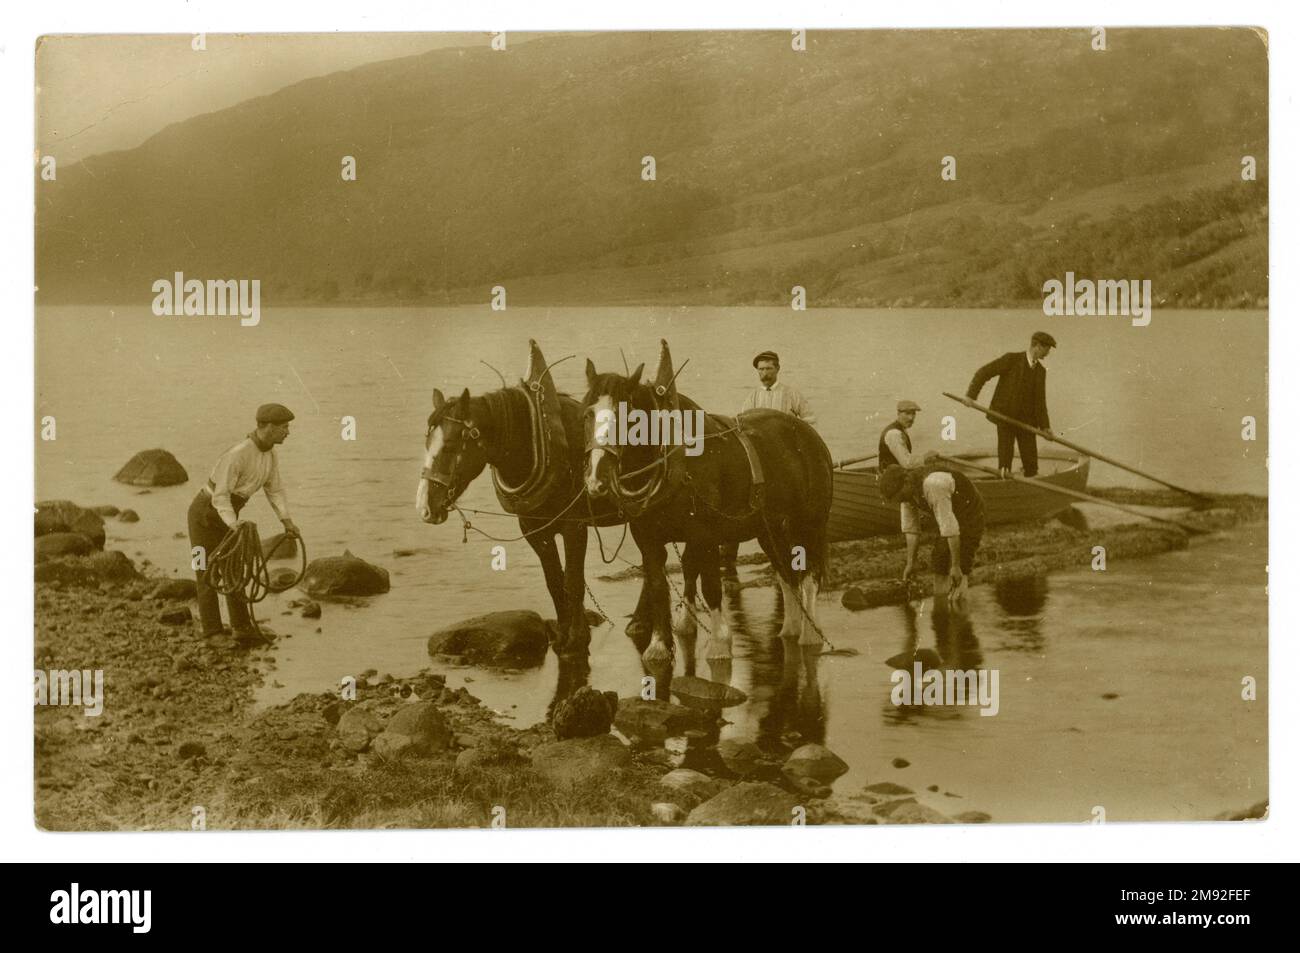 Original Edwardian era postcard of Country Scene,  agriculture /  lumberjacks, forestry workers with heavy horses logging along a lake, bringing logs into the shore. Postcard is published by E.A. Schwerdtfeger & Co London, EC. dated / posted 1912 possibly Cumbria, England,  U.K. Stock Photo